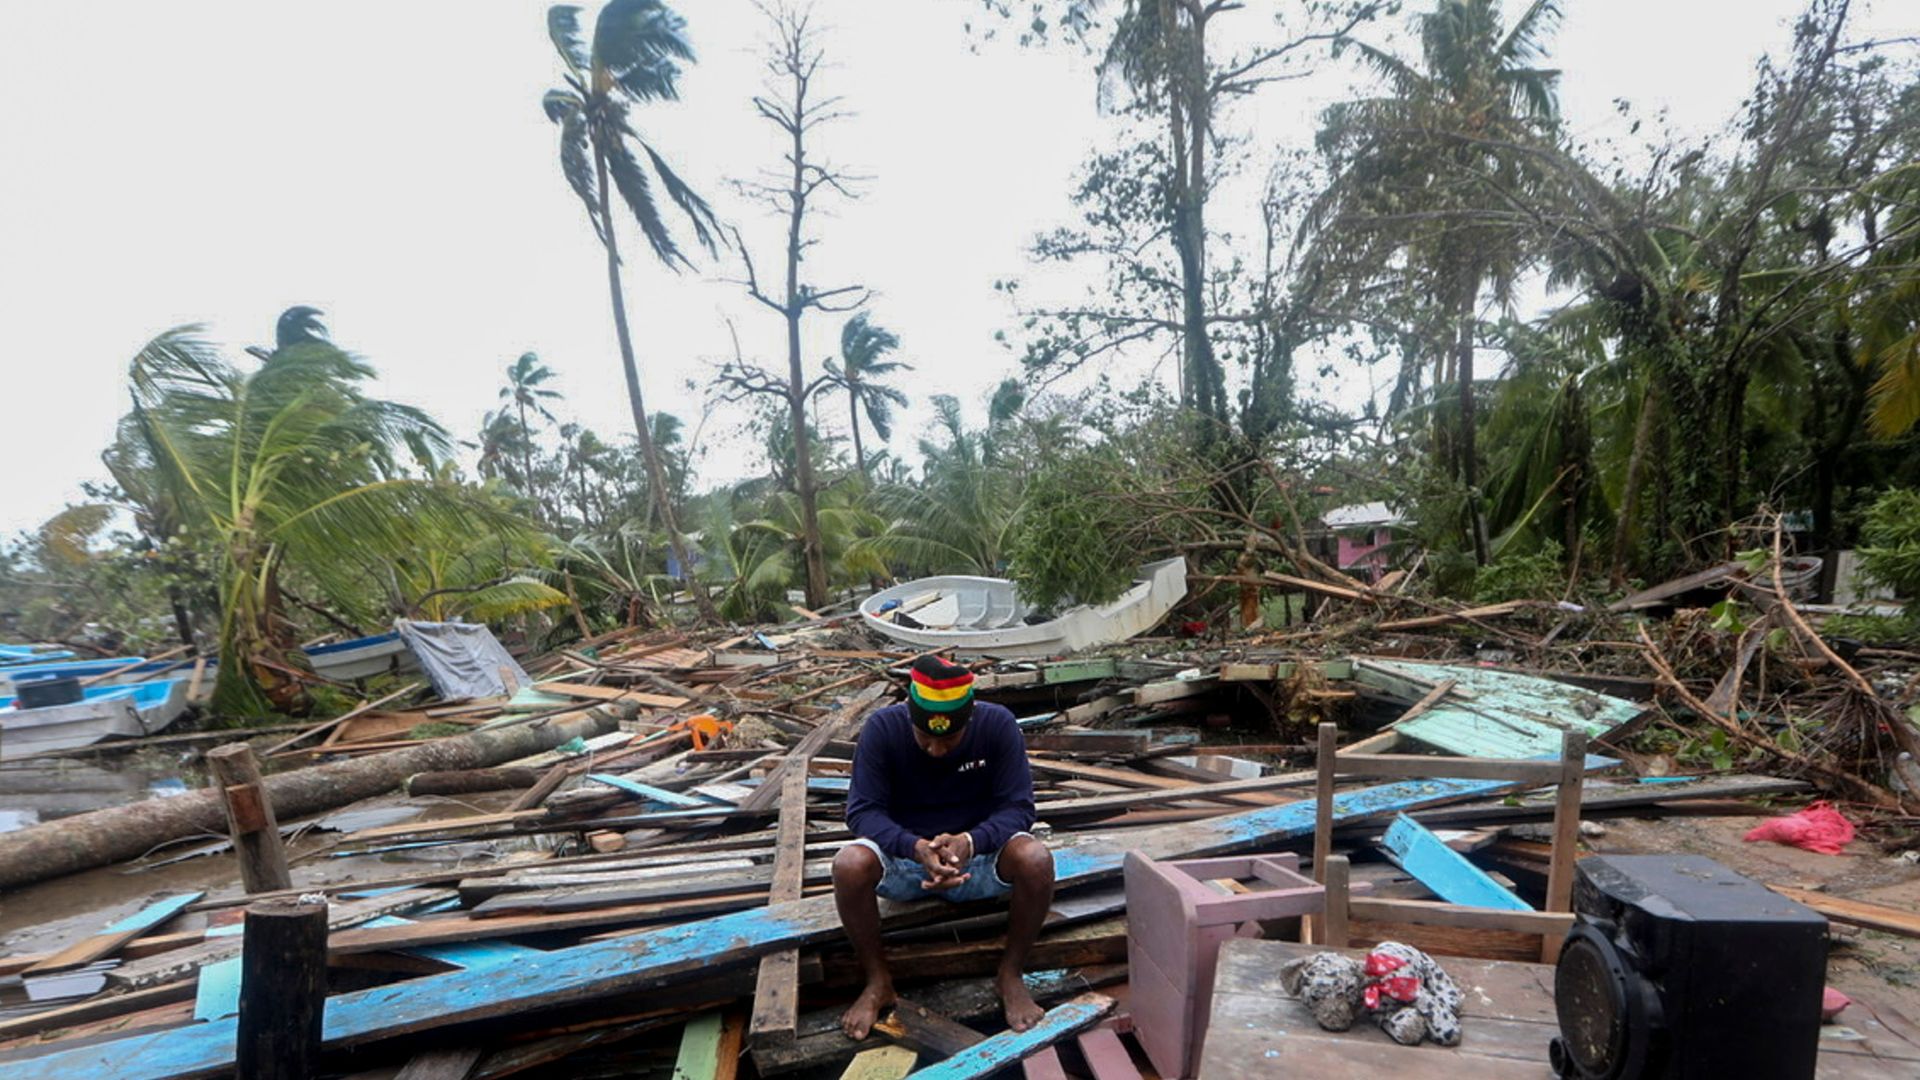  A man reacts as he looks at damages caused by the passage of Hurricane Eta in Puerto Cabezas, Nicaragua, on November 4